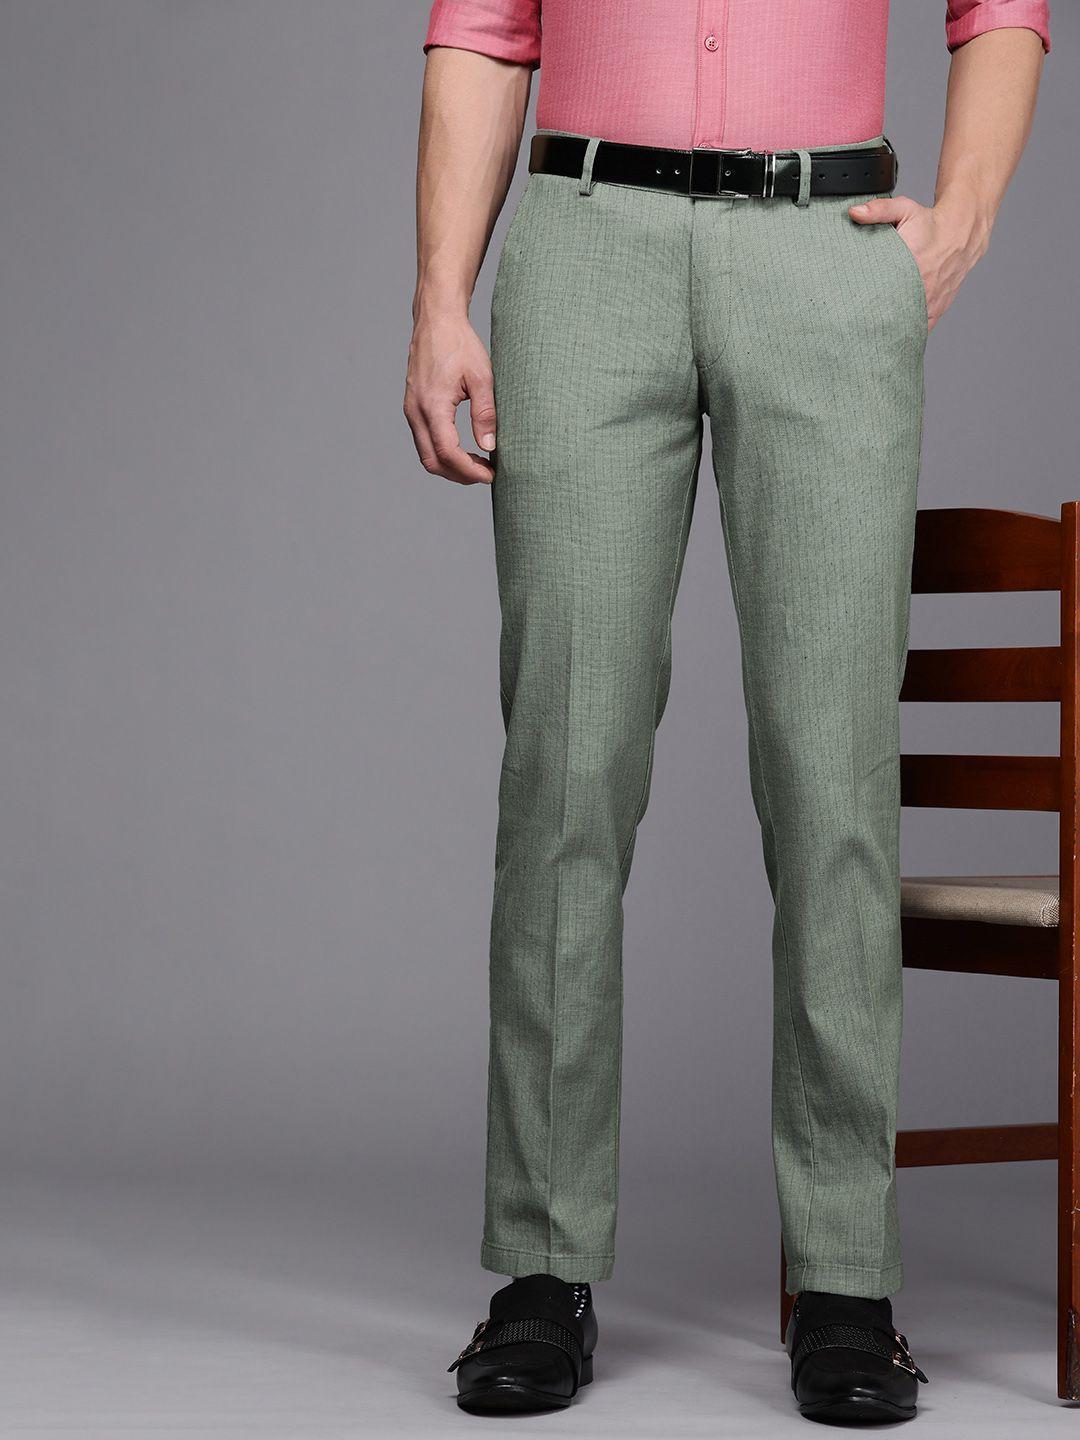 louis-philippe-men-olive-green-striped-slim-fit-formal-trousers